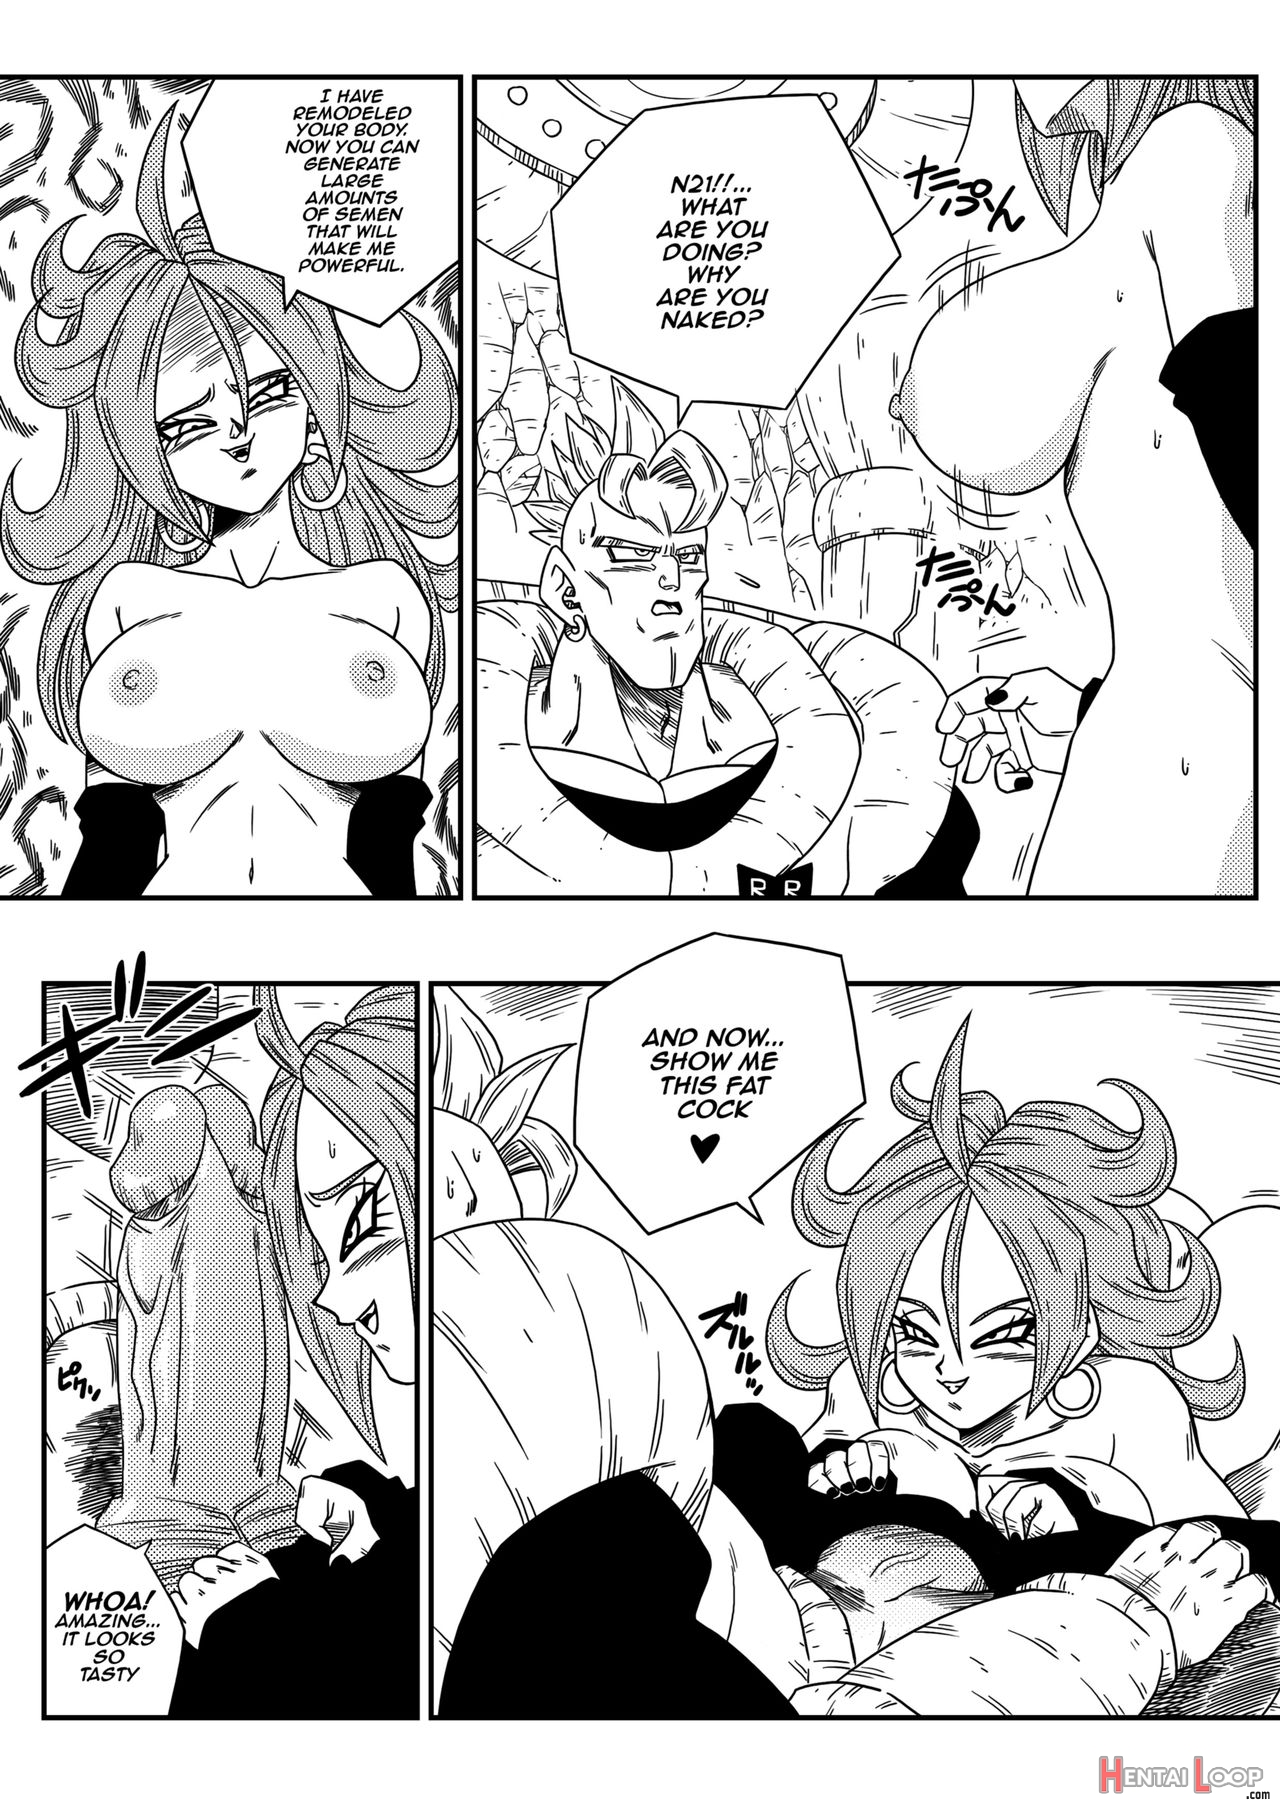 Busty Android Wants To Dominate The World!! page 6